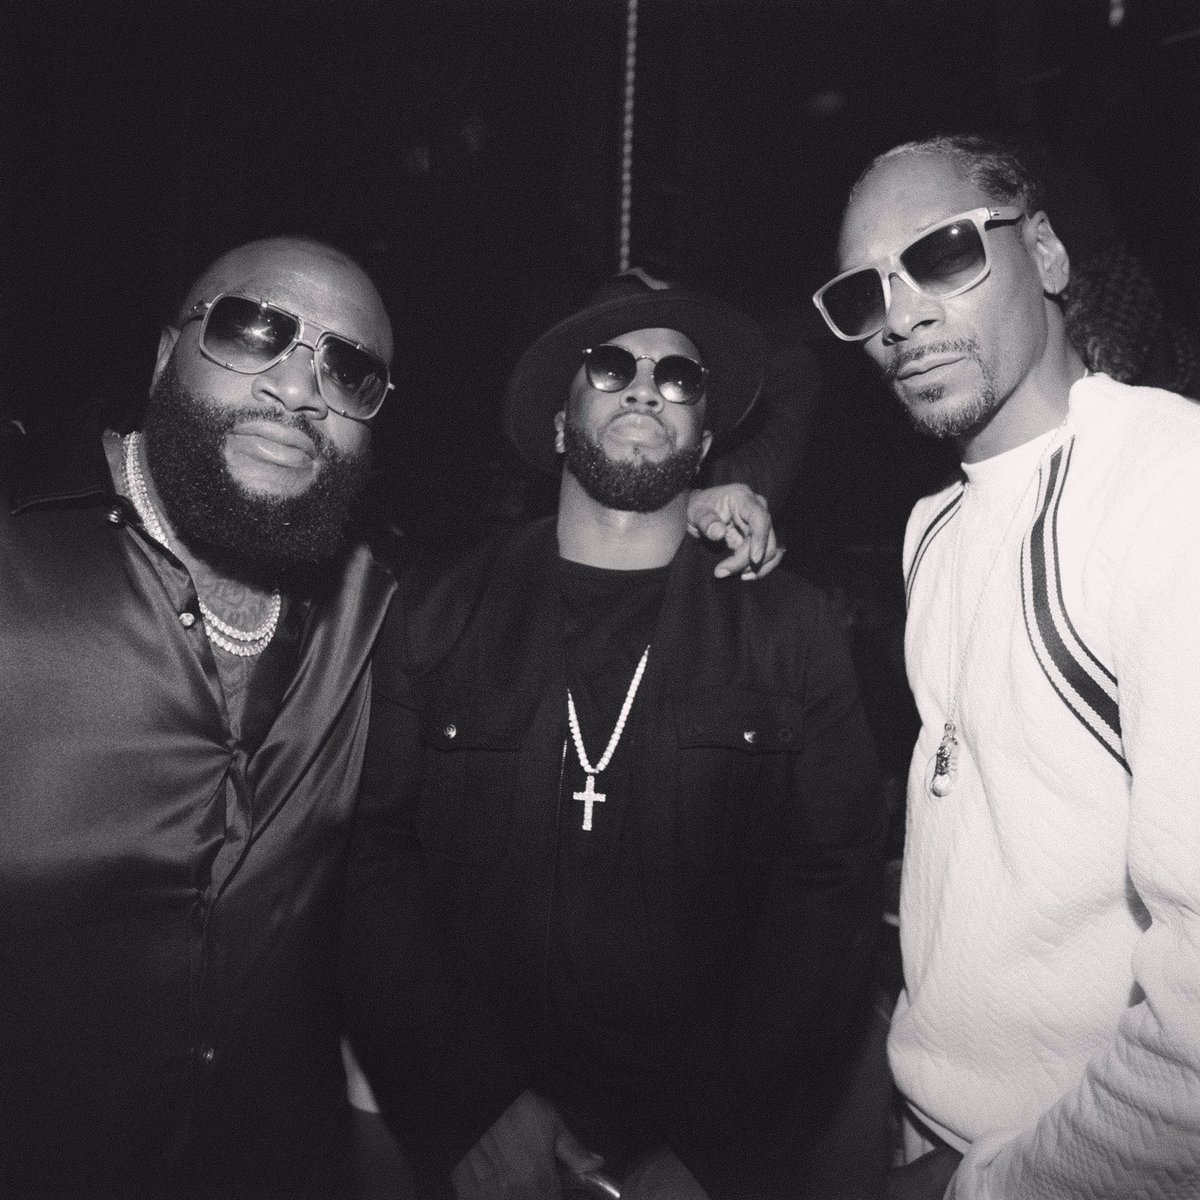 #AboutLastNight #BlackExcellence with my brothers @SnoopDogg @rickyrozay https://t.co/dYqiId6d69 https://t.co/5mMP57maUP